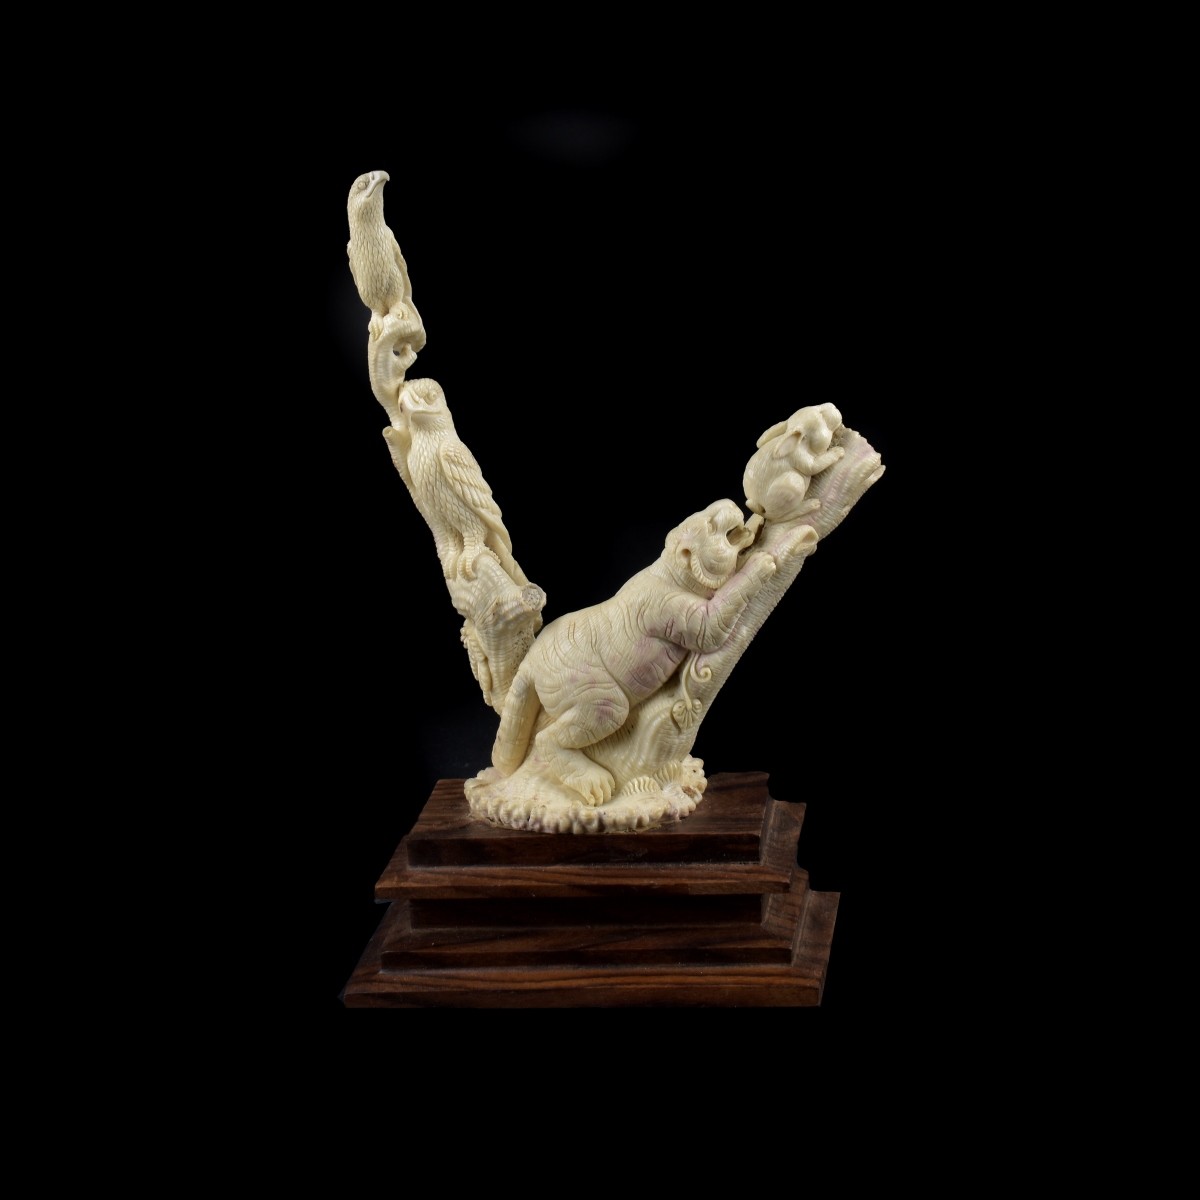 Chinese Ivory Carving